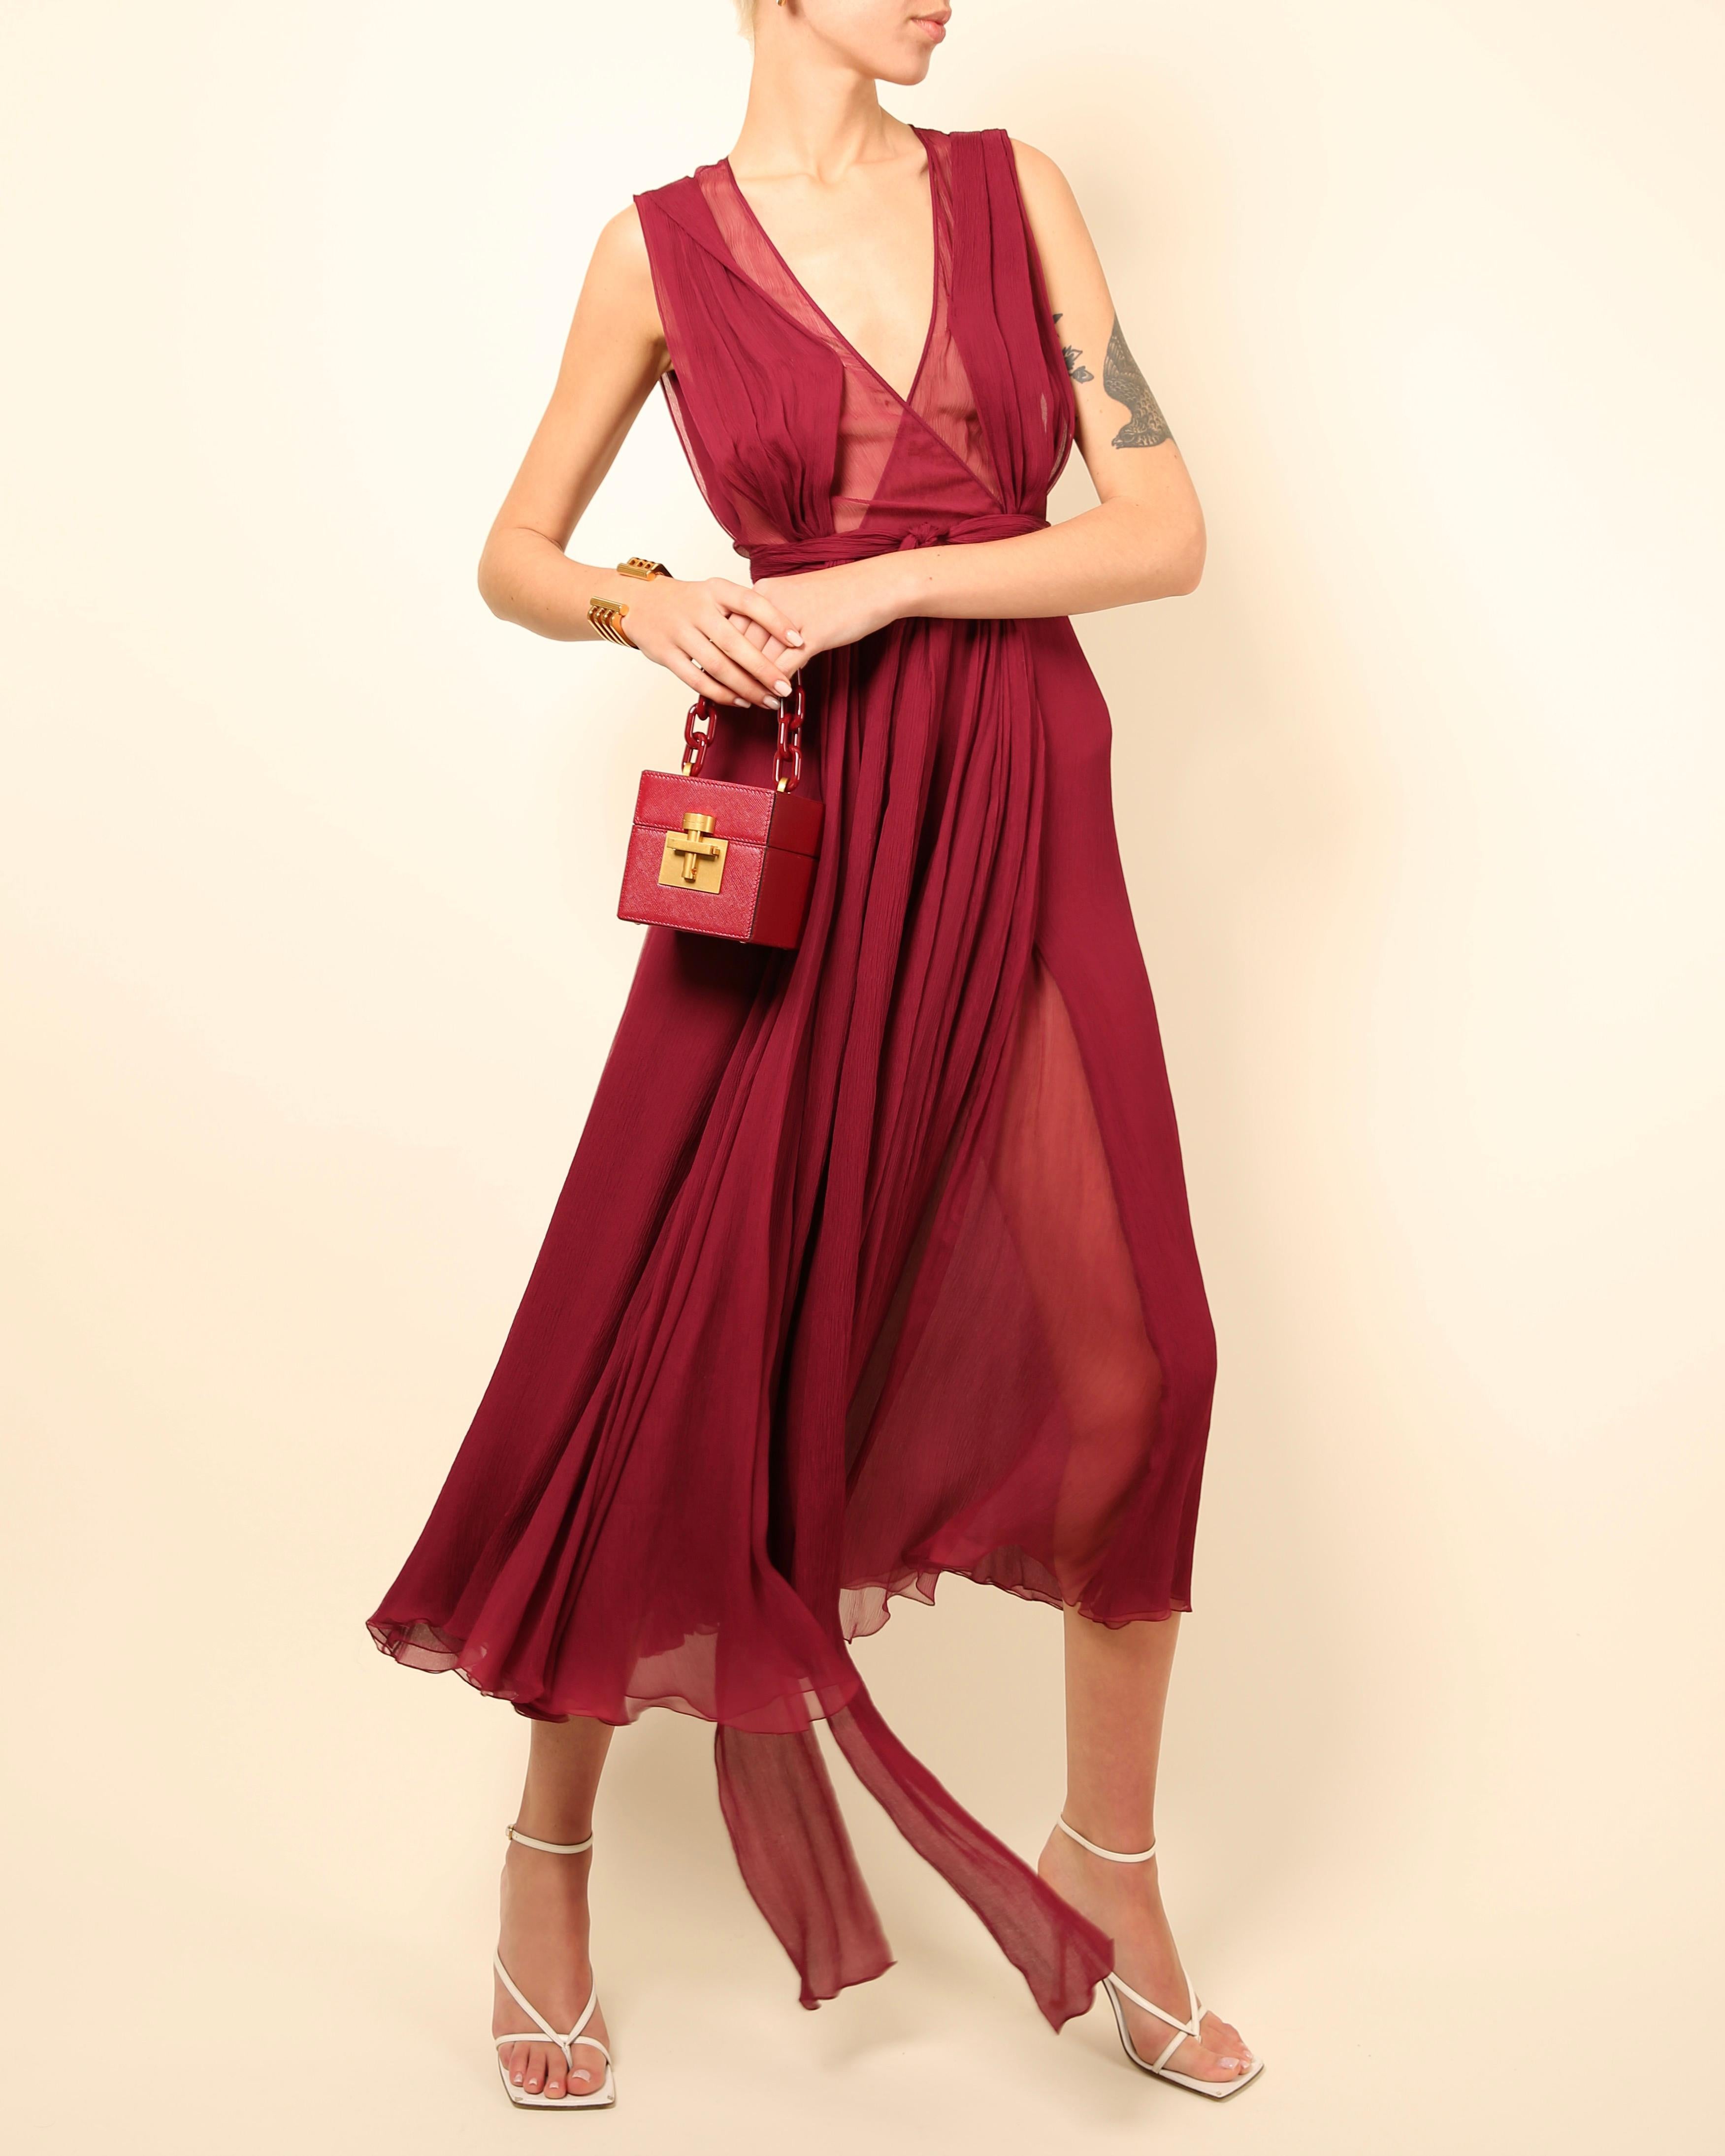 Gucci Fall 2011 burgundy chiffon silk plunging neckline sheer cut out gown dress For Sale 3